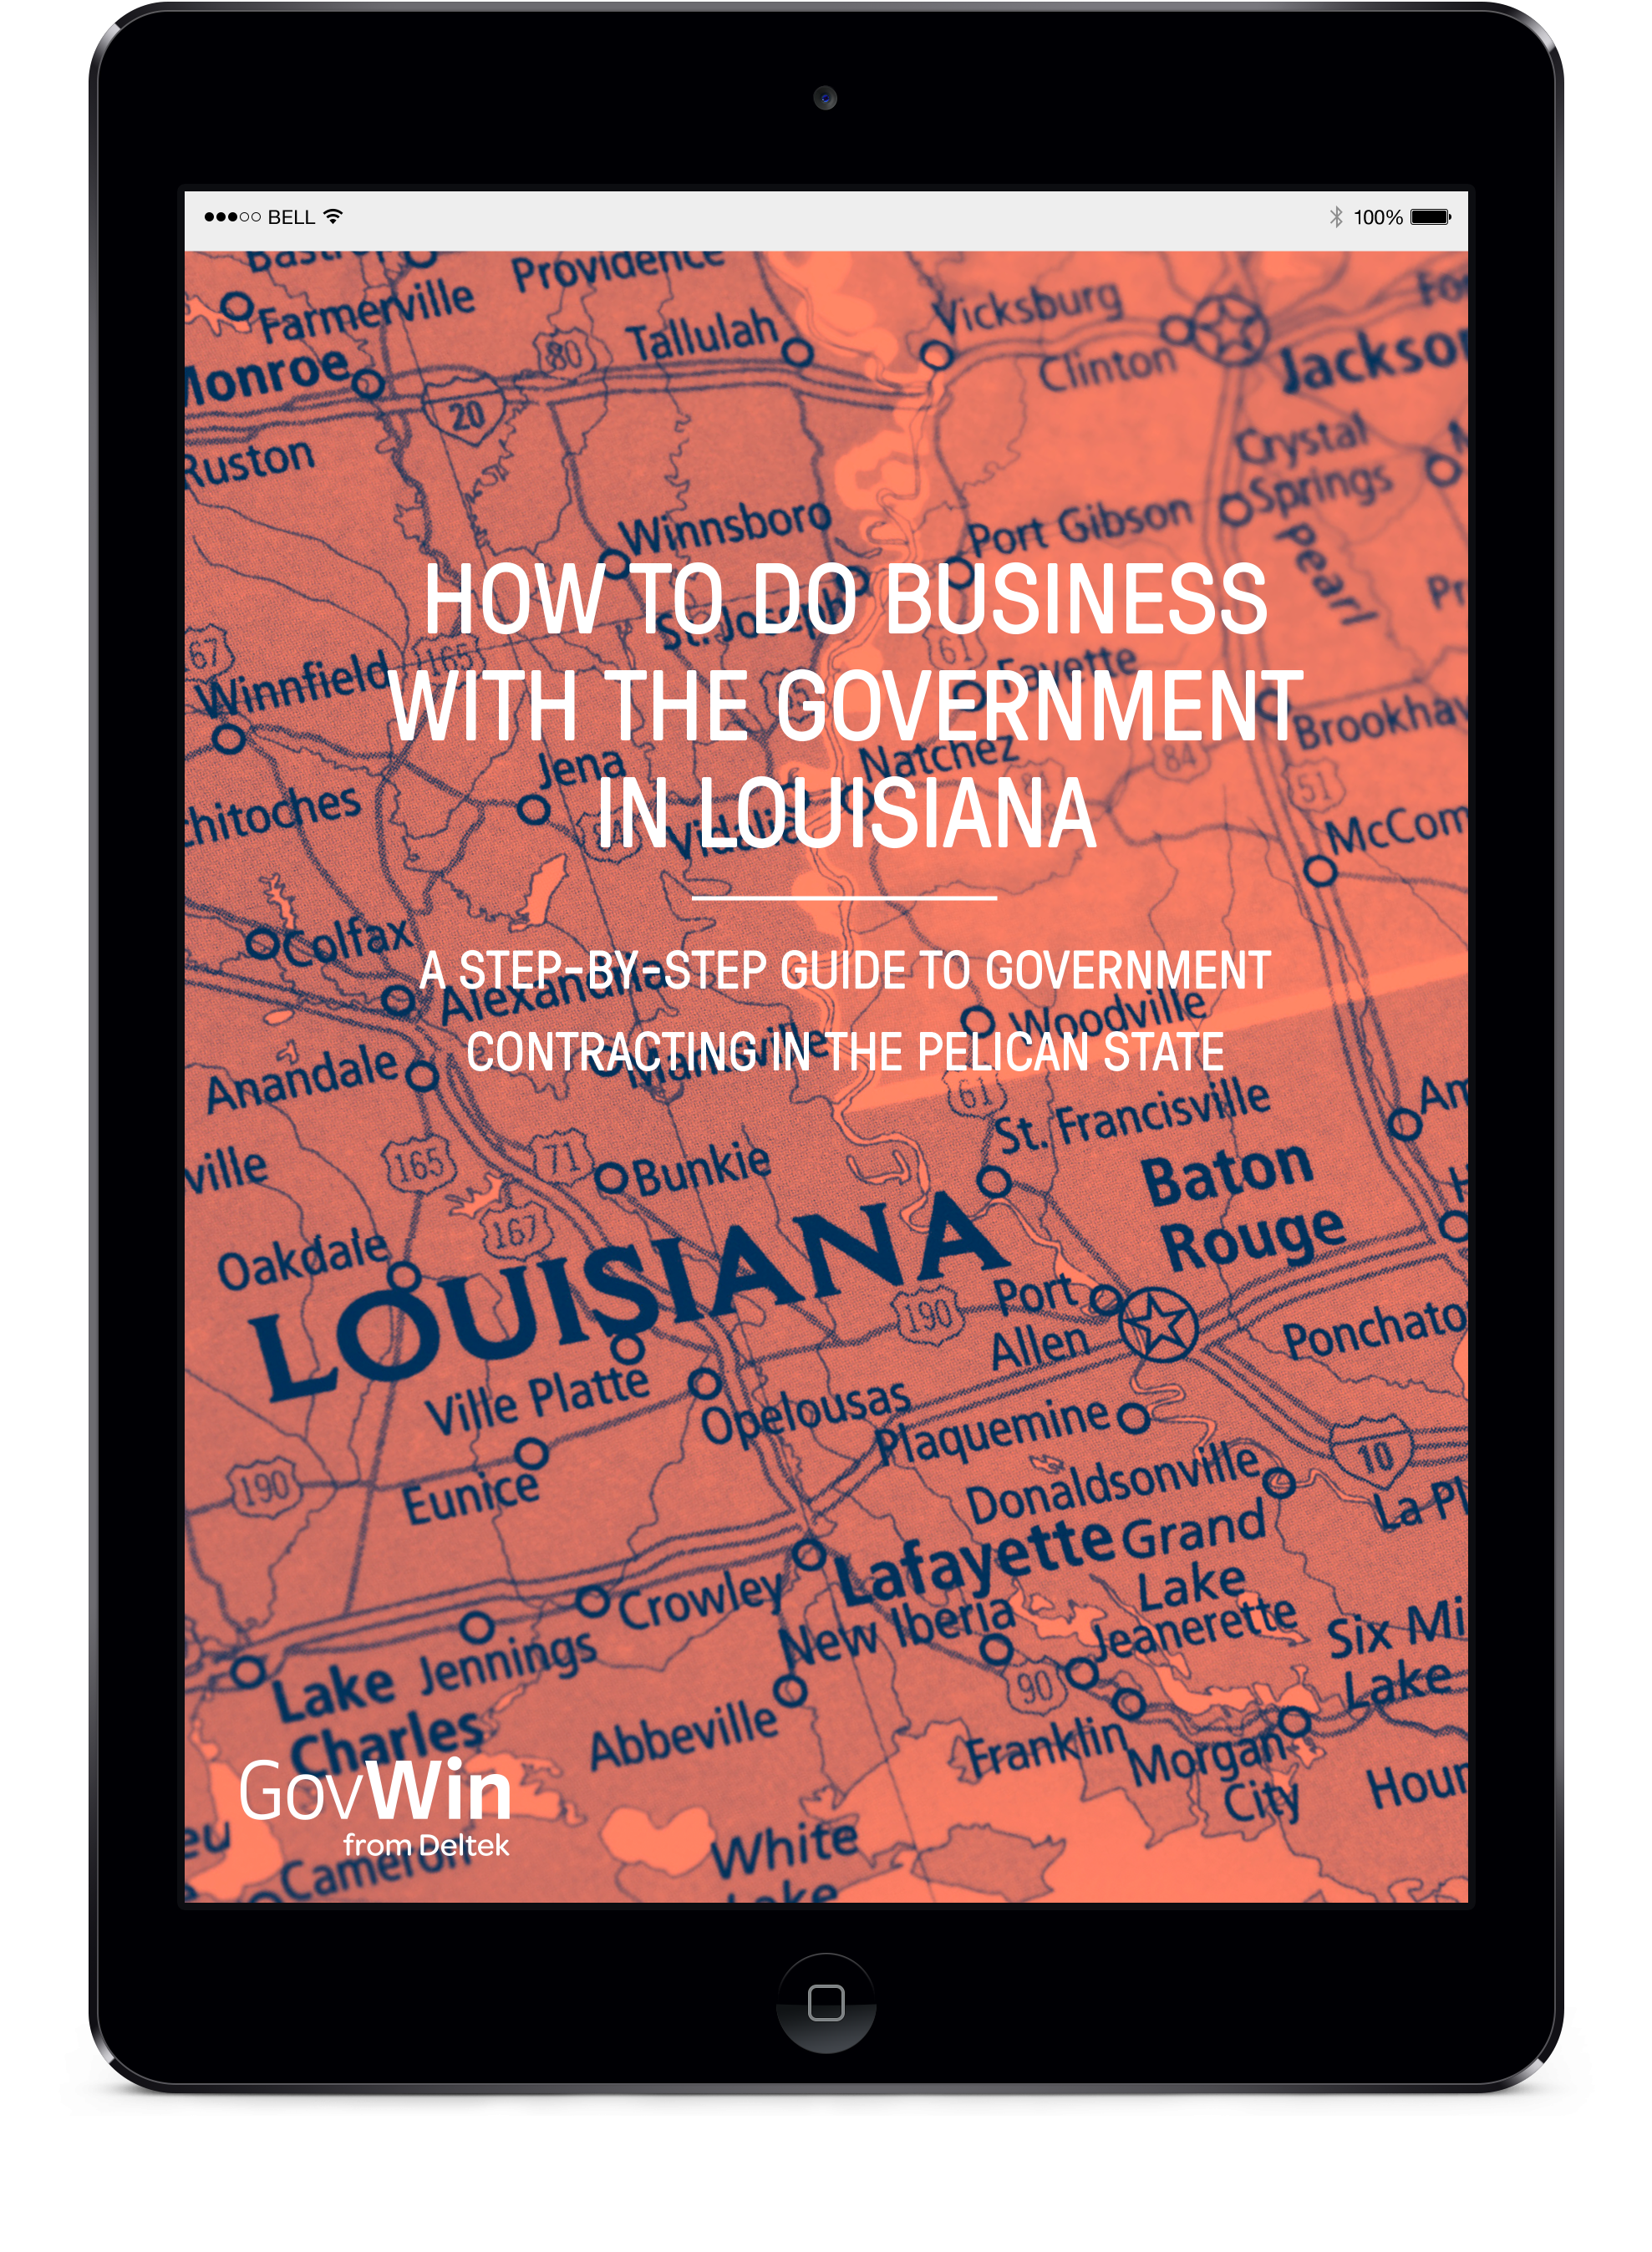 How to do Business with the Government in Louisiana